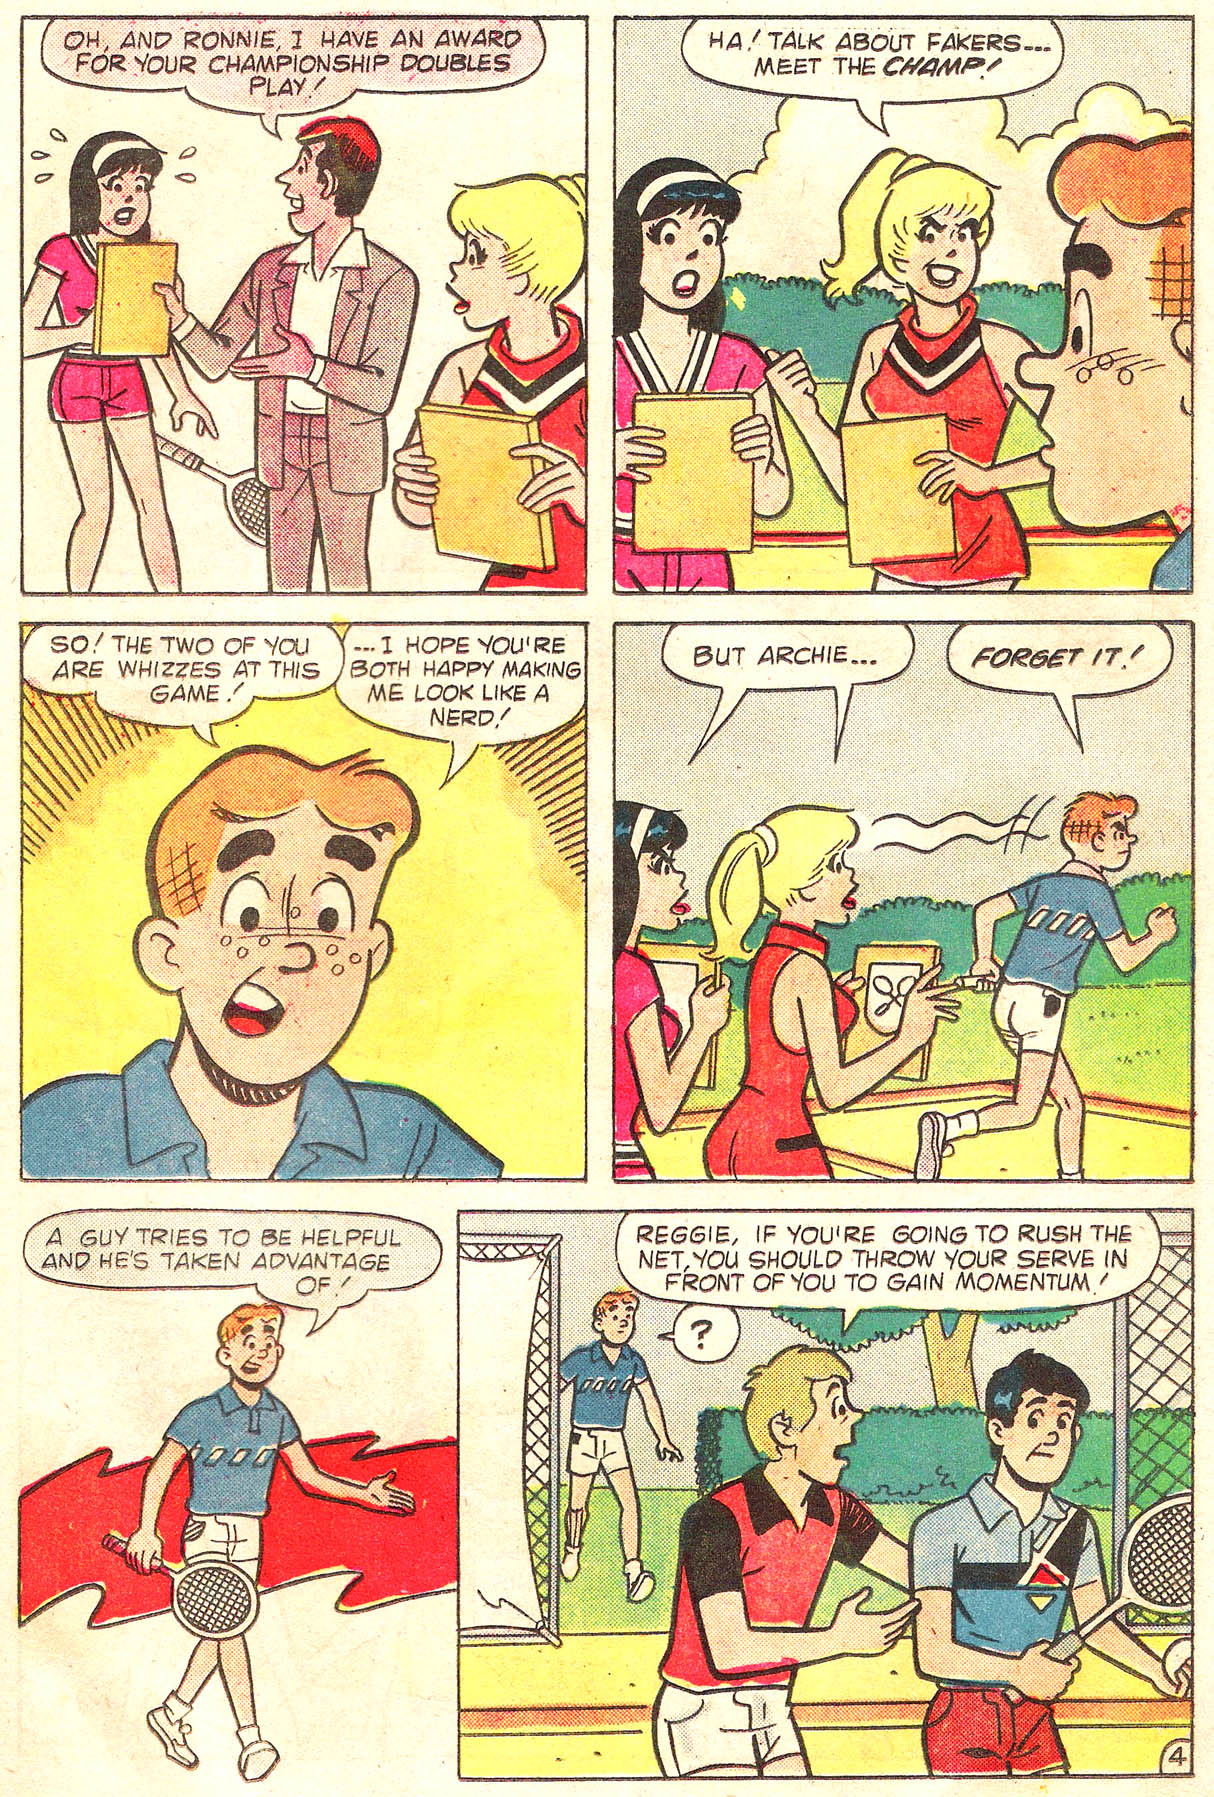 Read online Archie's Girls Betty and Veronica comic -  Issue #338 - 23